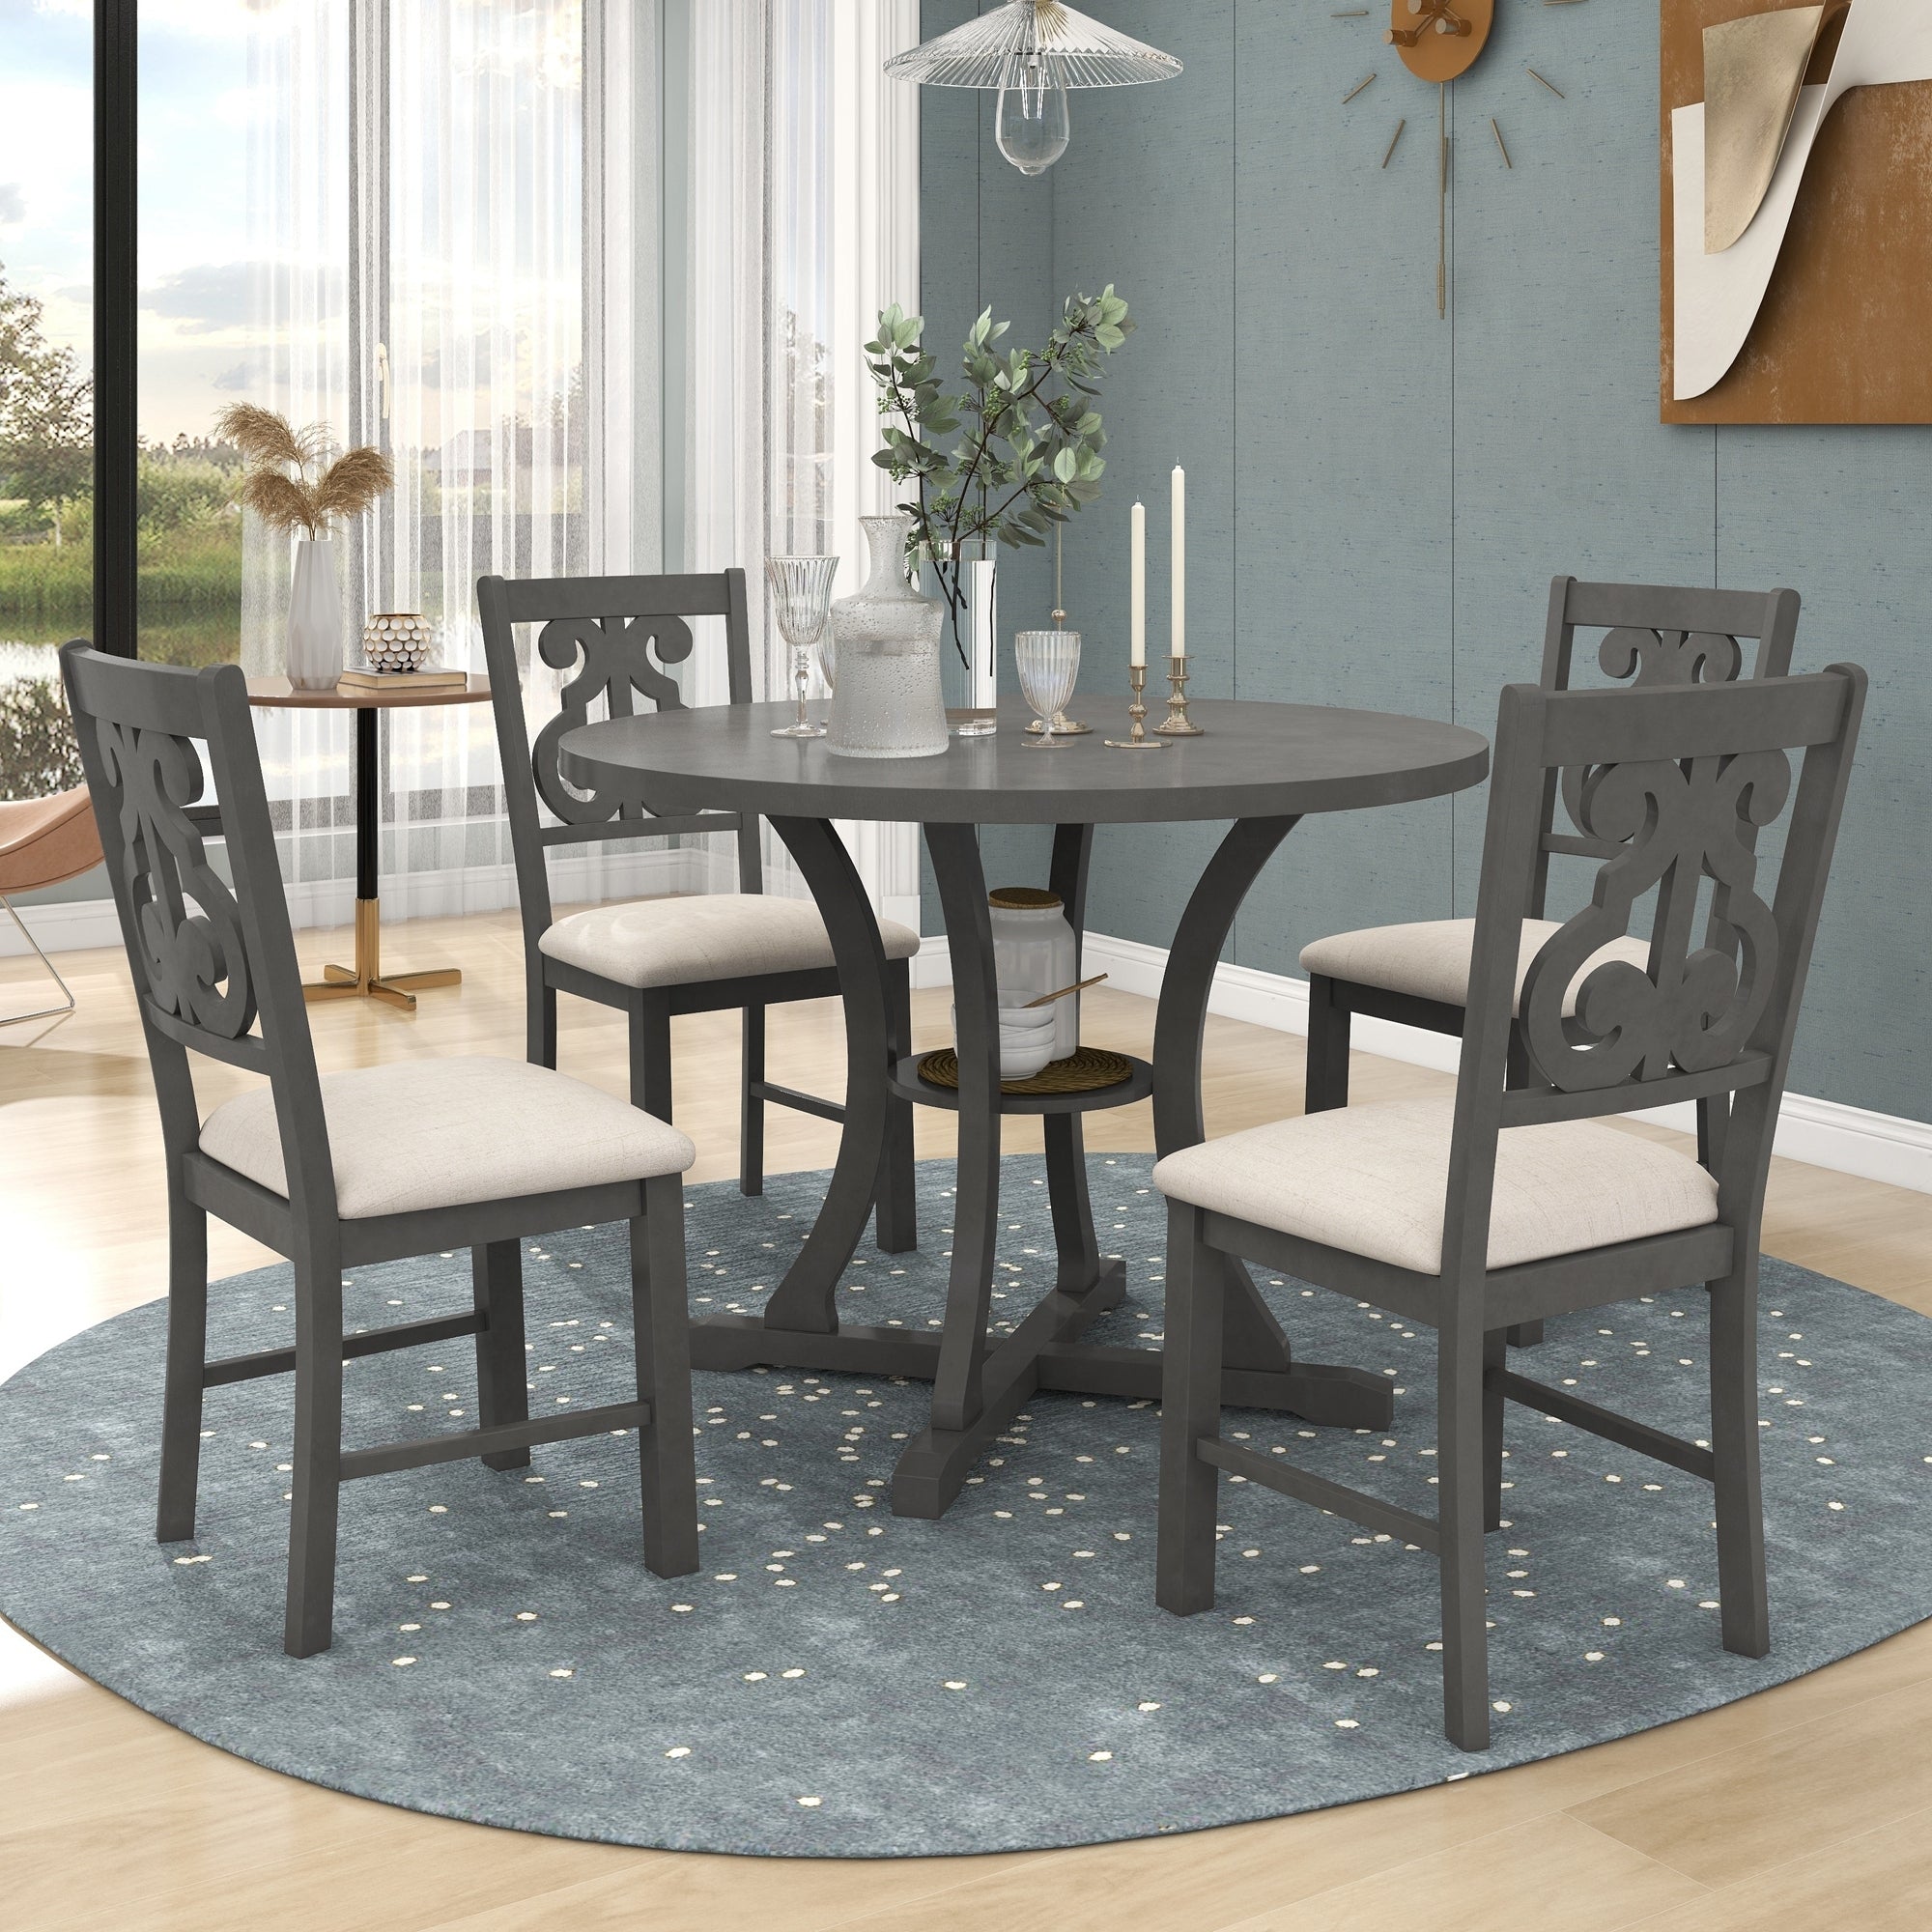 TREXM 5-Piece Round Dining Table and Chair Set with Special-shaped Legs and an Exquisitely Designed Hollow Chair Back for Dining Room (Gray)